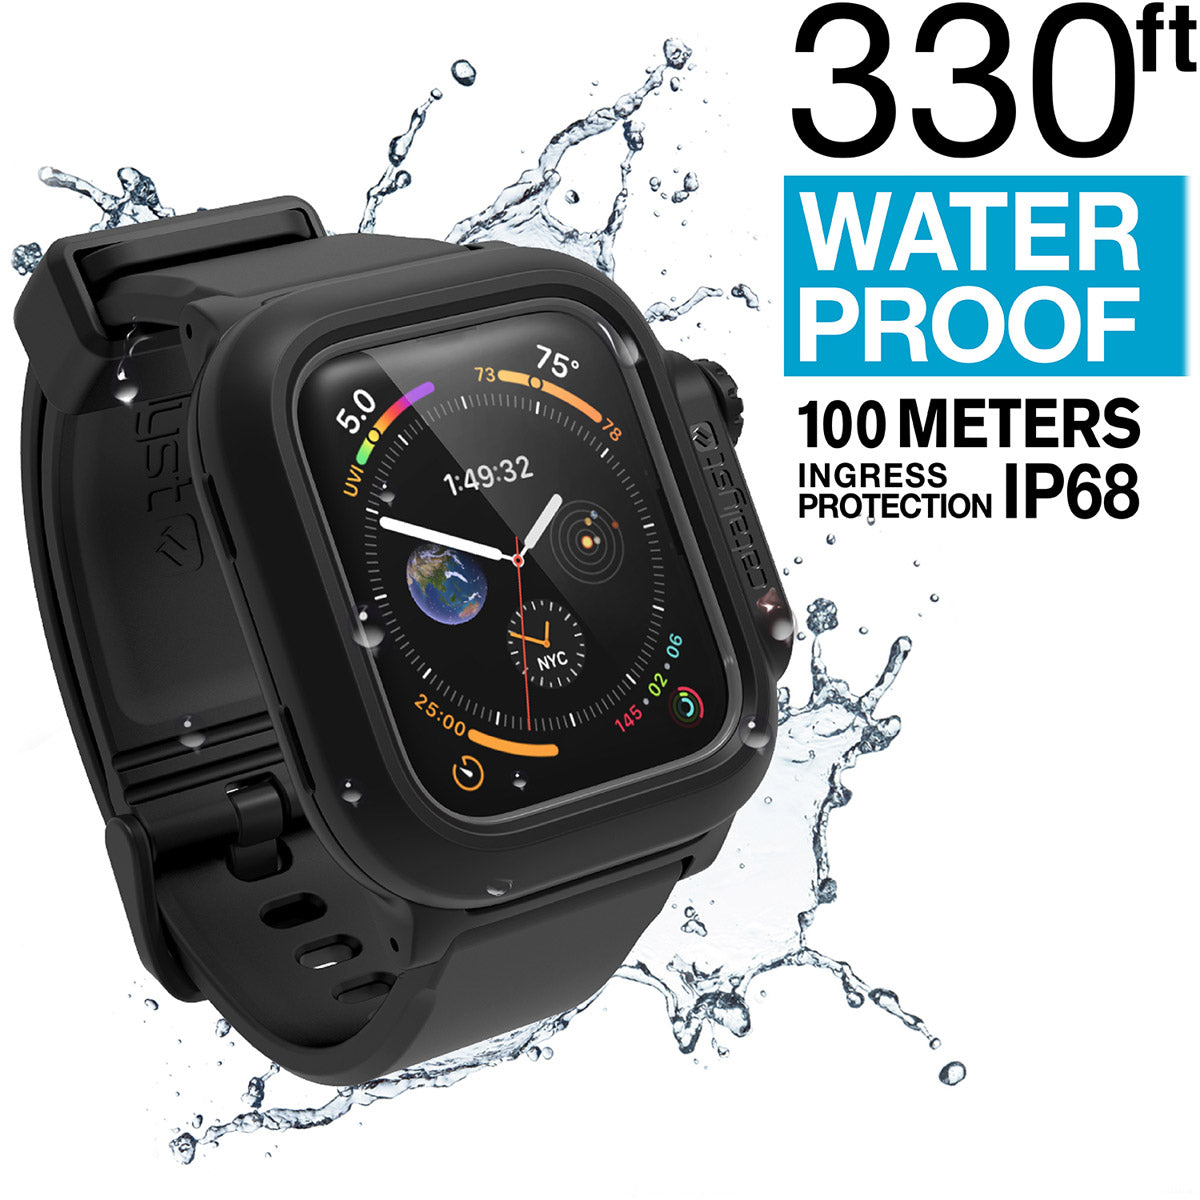 catalyst apple watch series 6 5 4 se gen 2 1 40mm 44mm waterproof case band stealth black with splashes of water text reads 330ft waterproof 100 meters ingress protection ip68